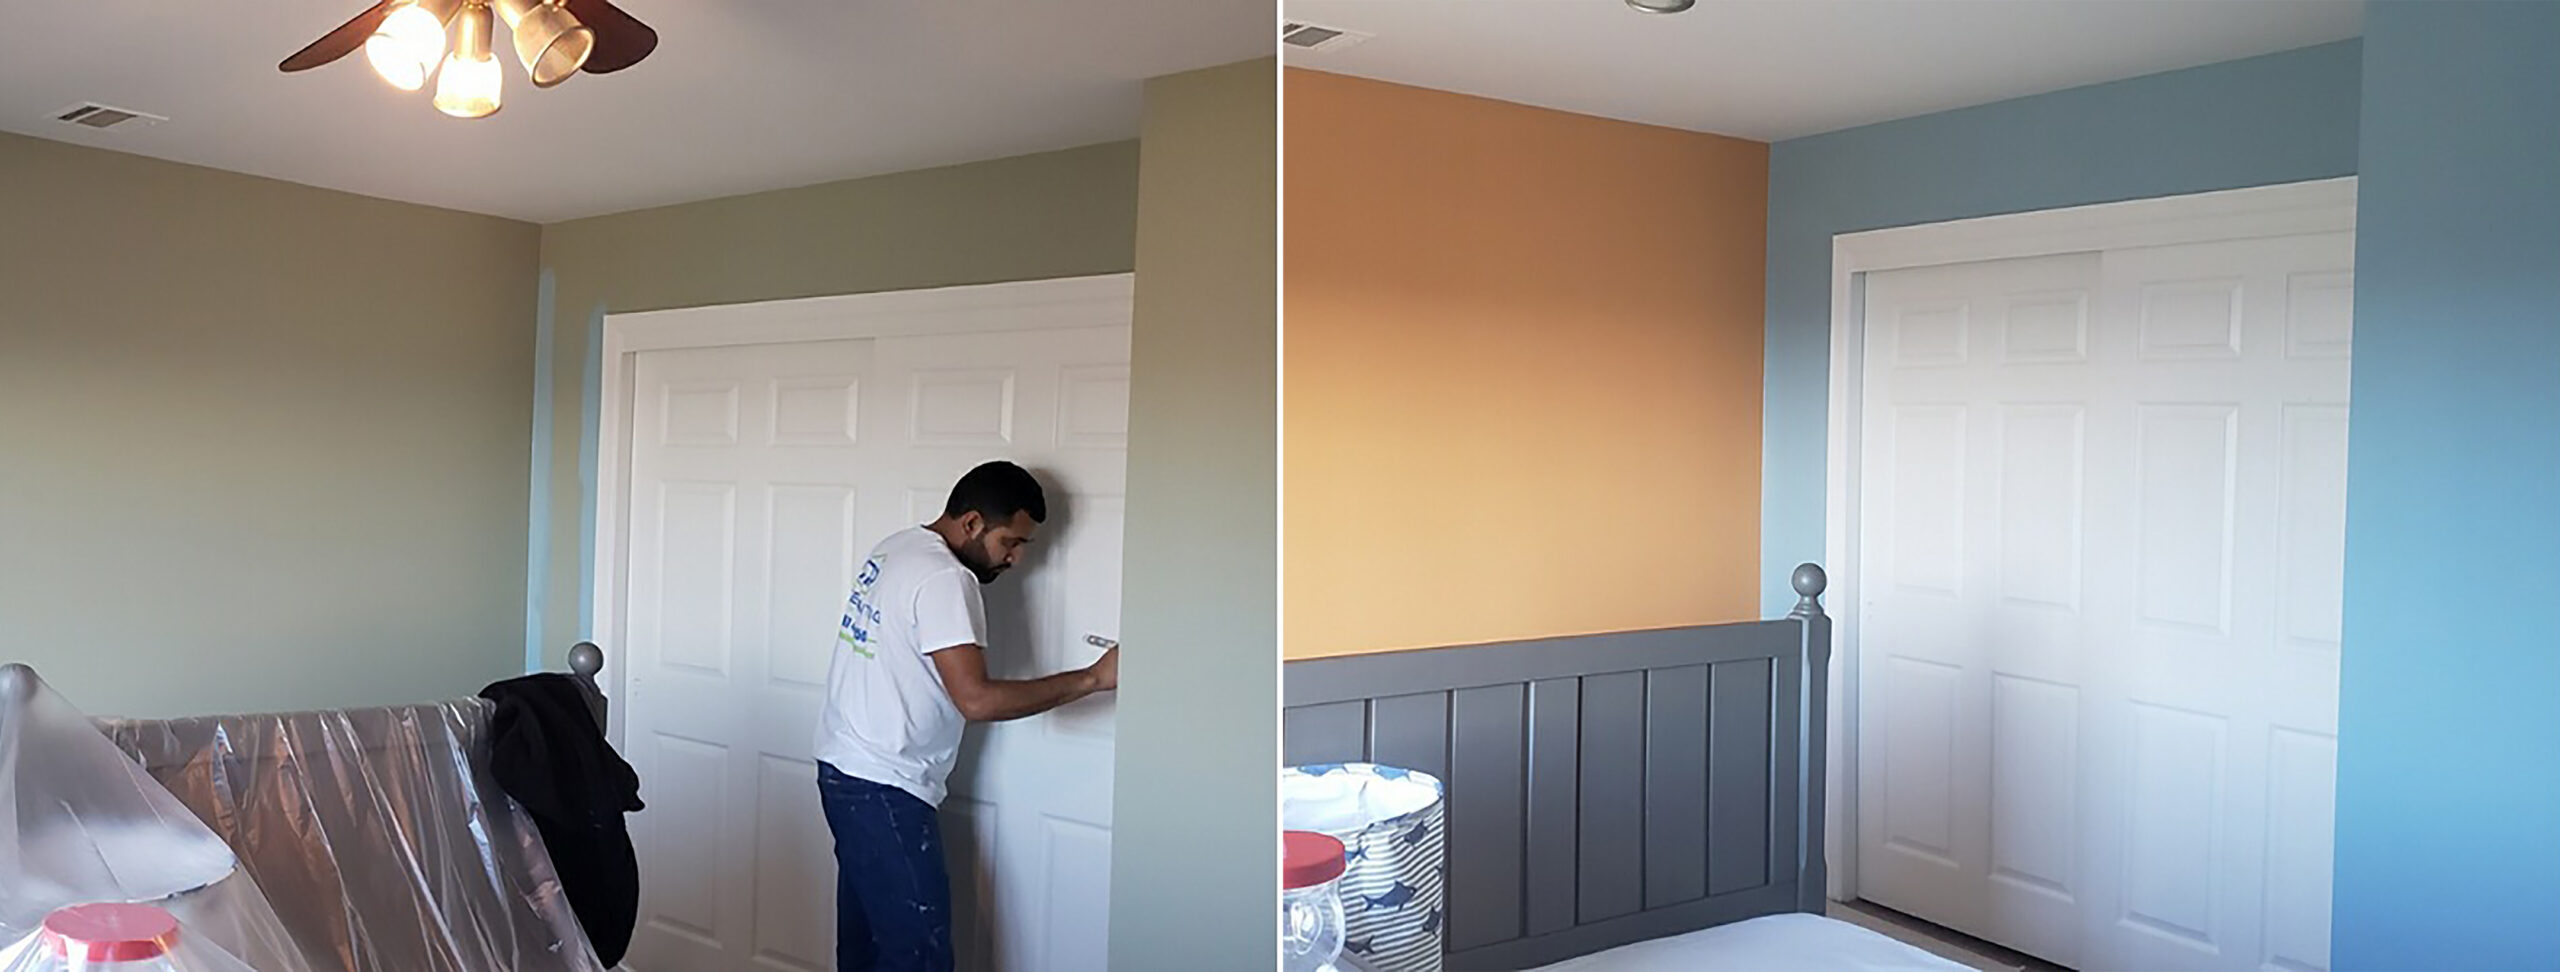 Interior Bedroom Painting Before and after